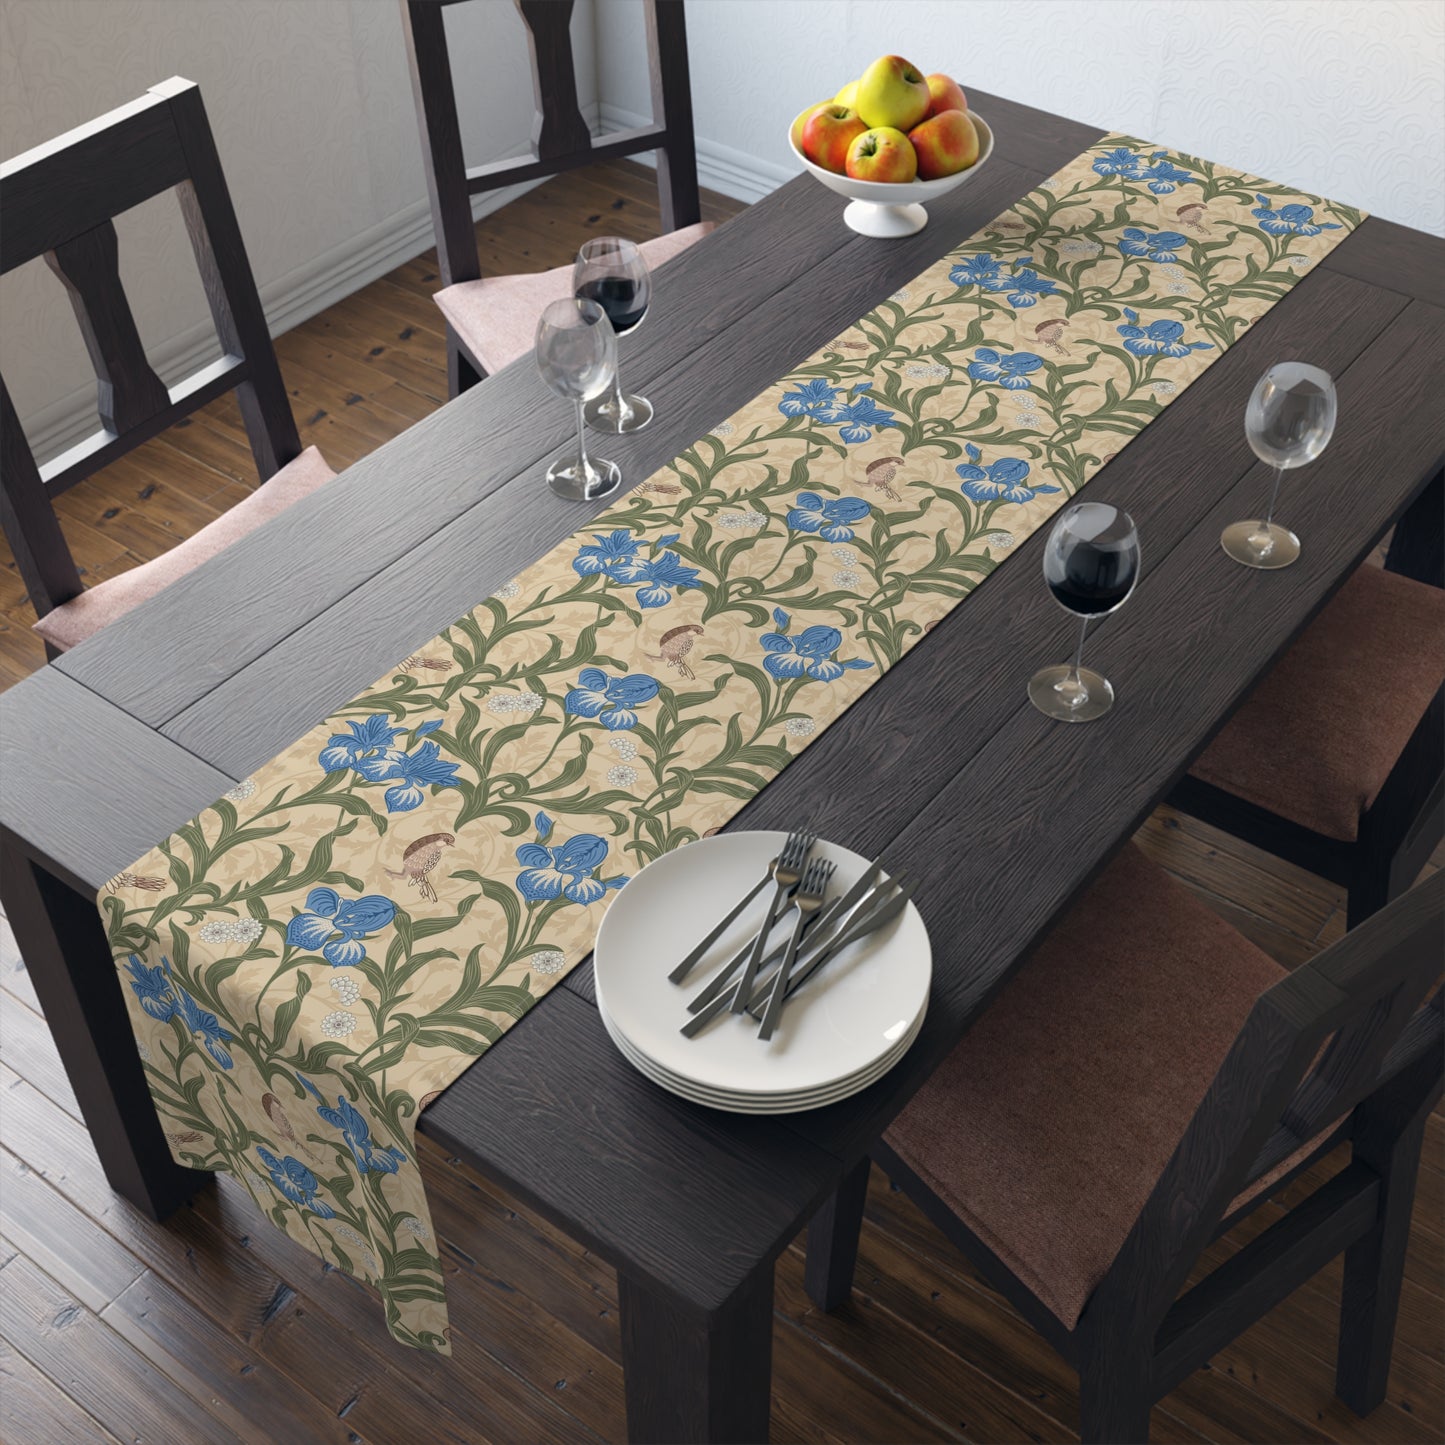 william-morris-co-table-runner-blue-iris-collection-9